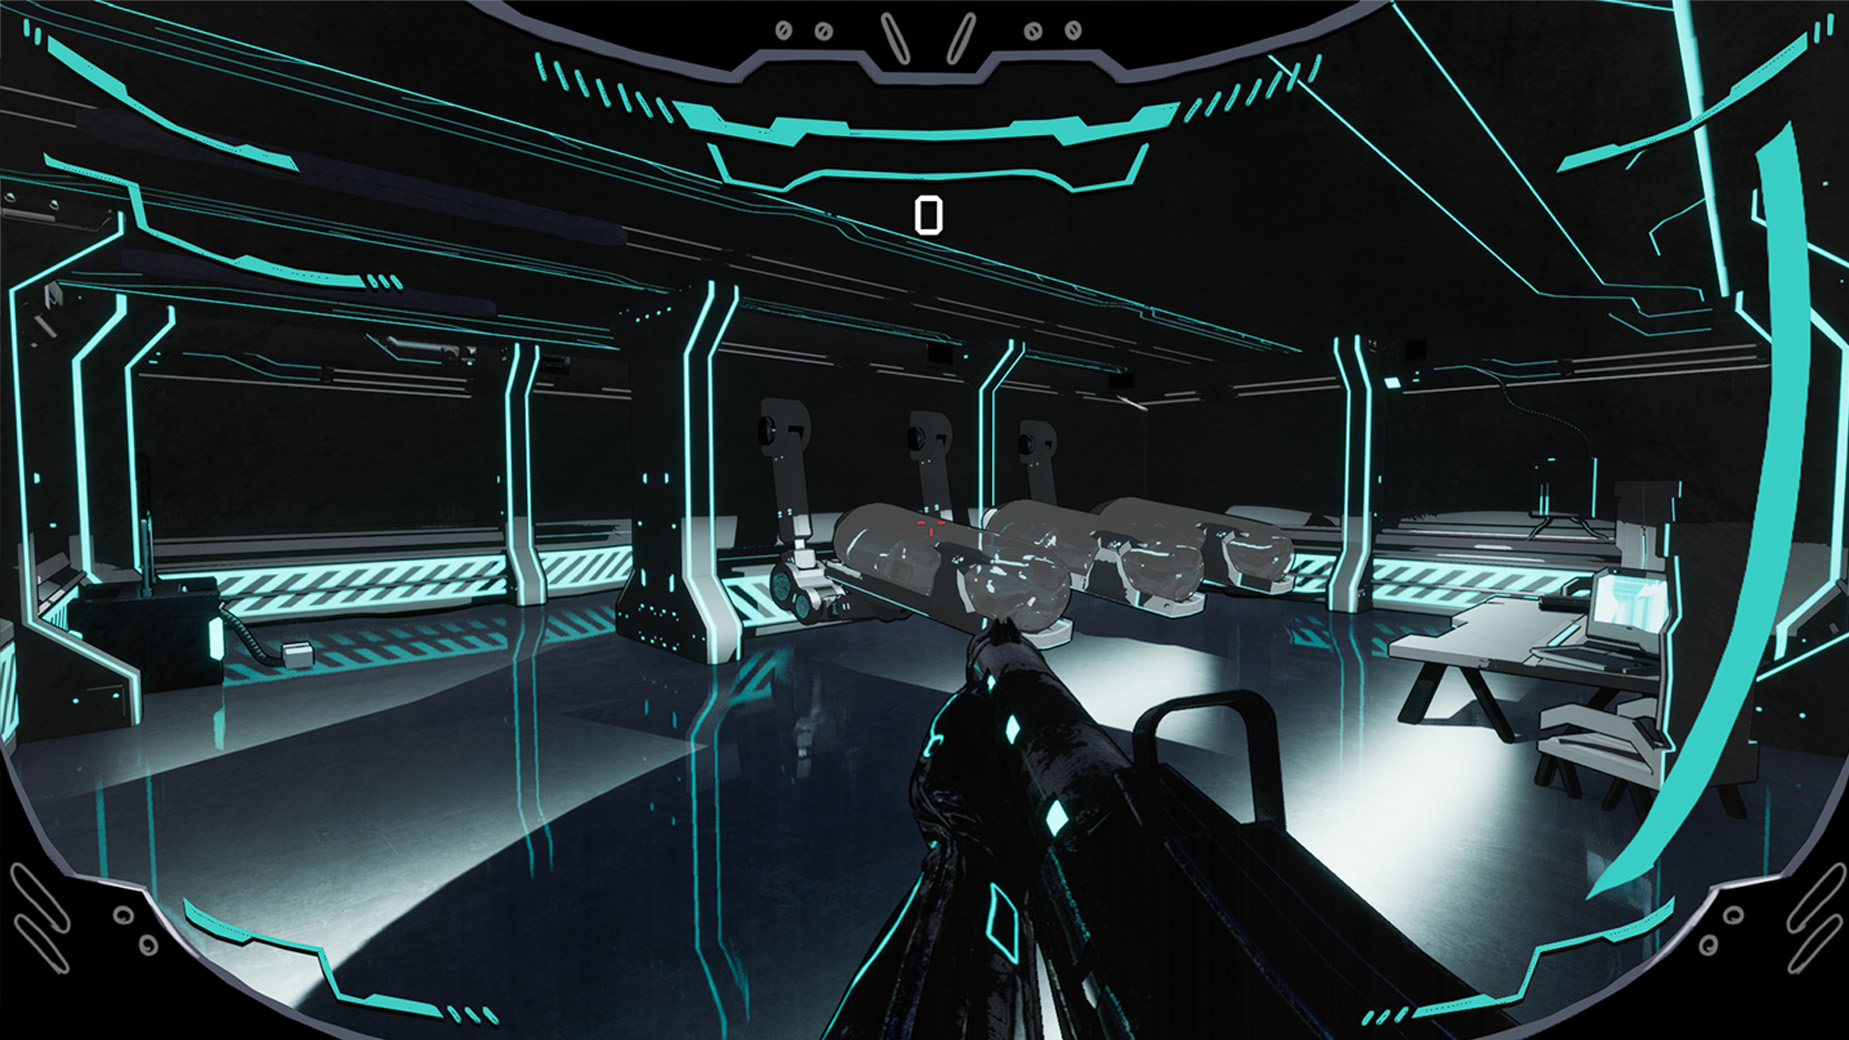 A screenshot from a game displaying a brightly lit science fiction room with glass pods and technical equipment